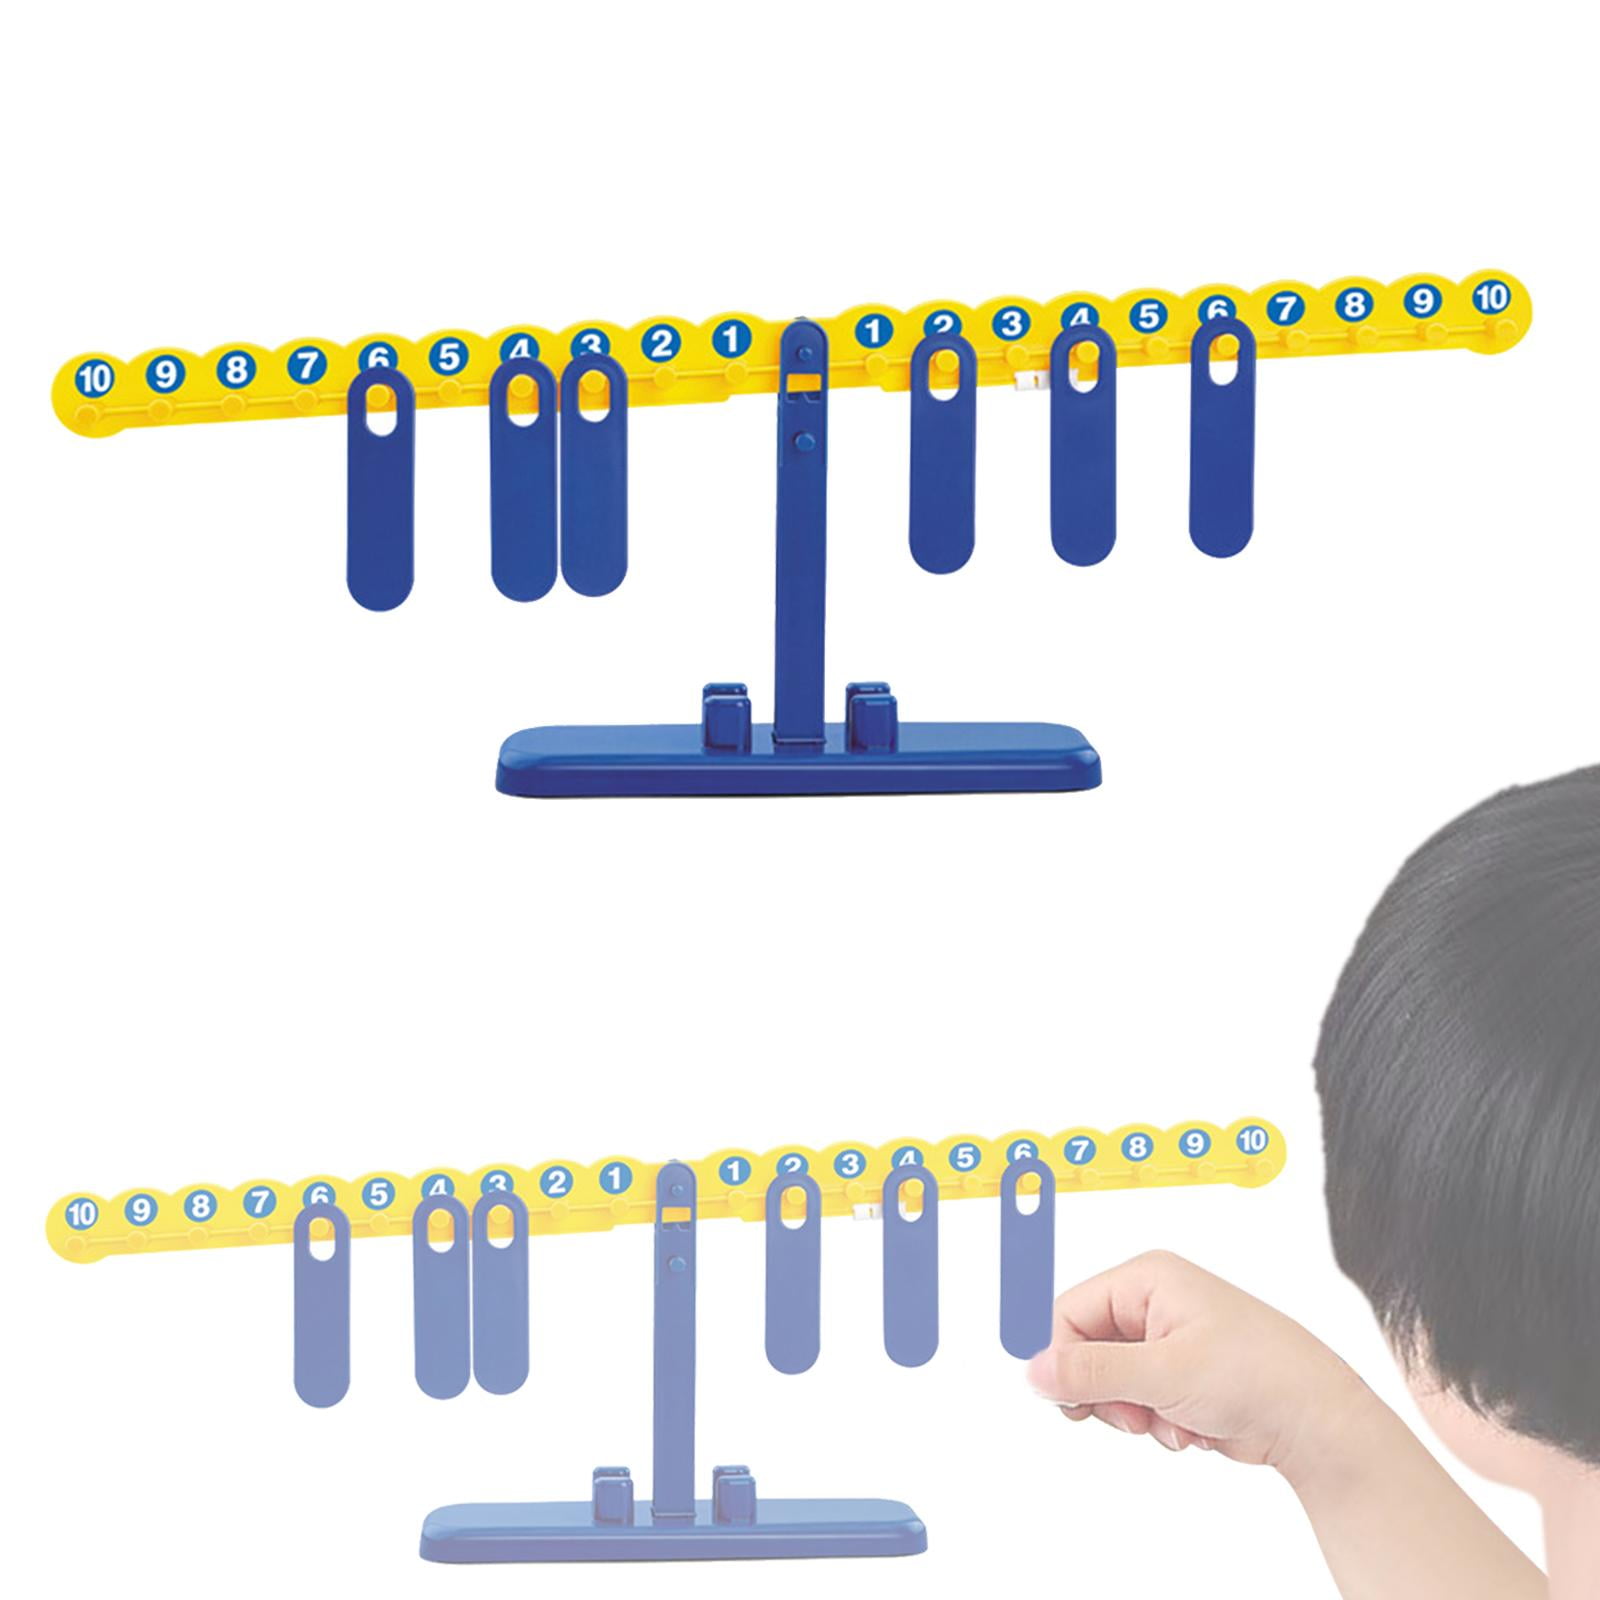 Customizble Balance Scale Children's Learning, Model Name/Number